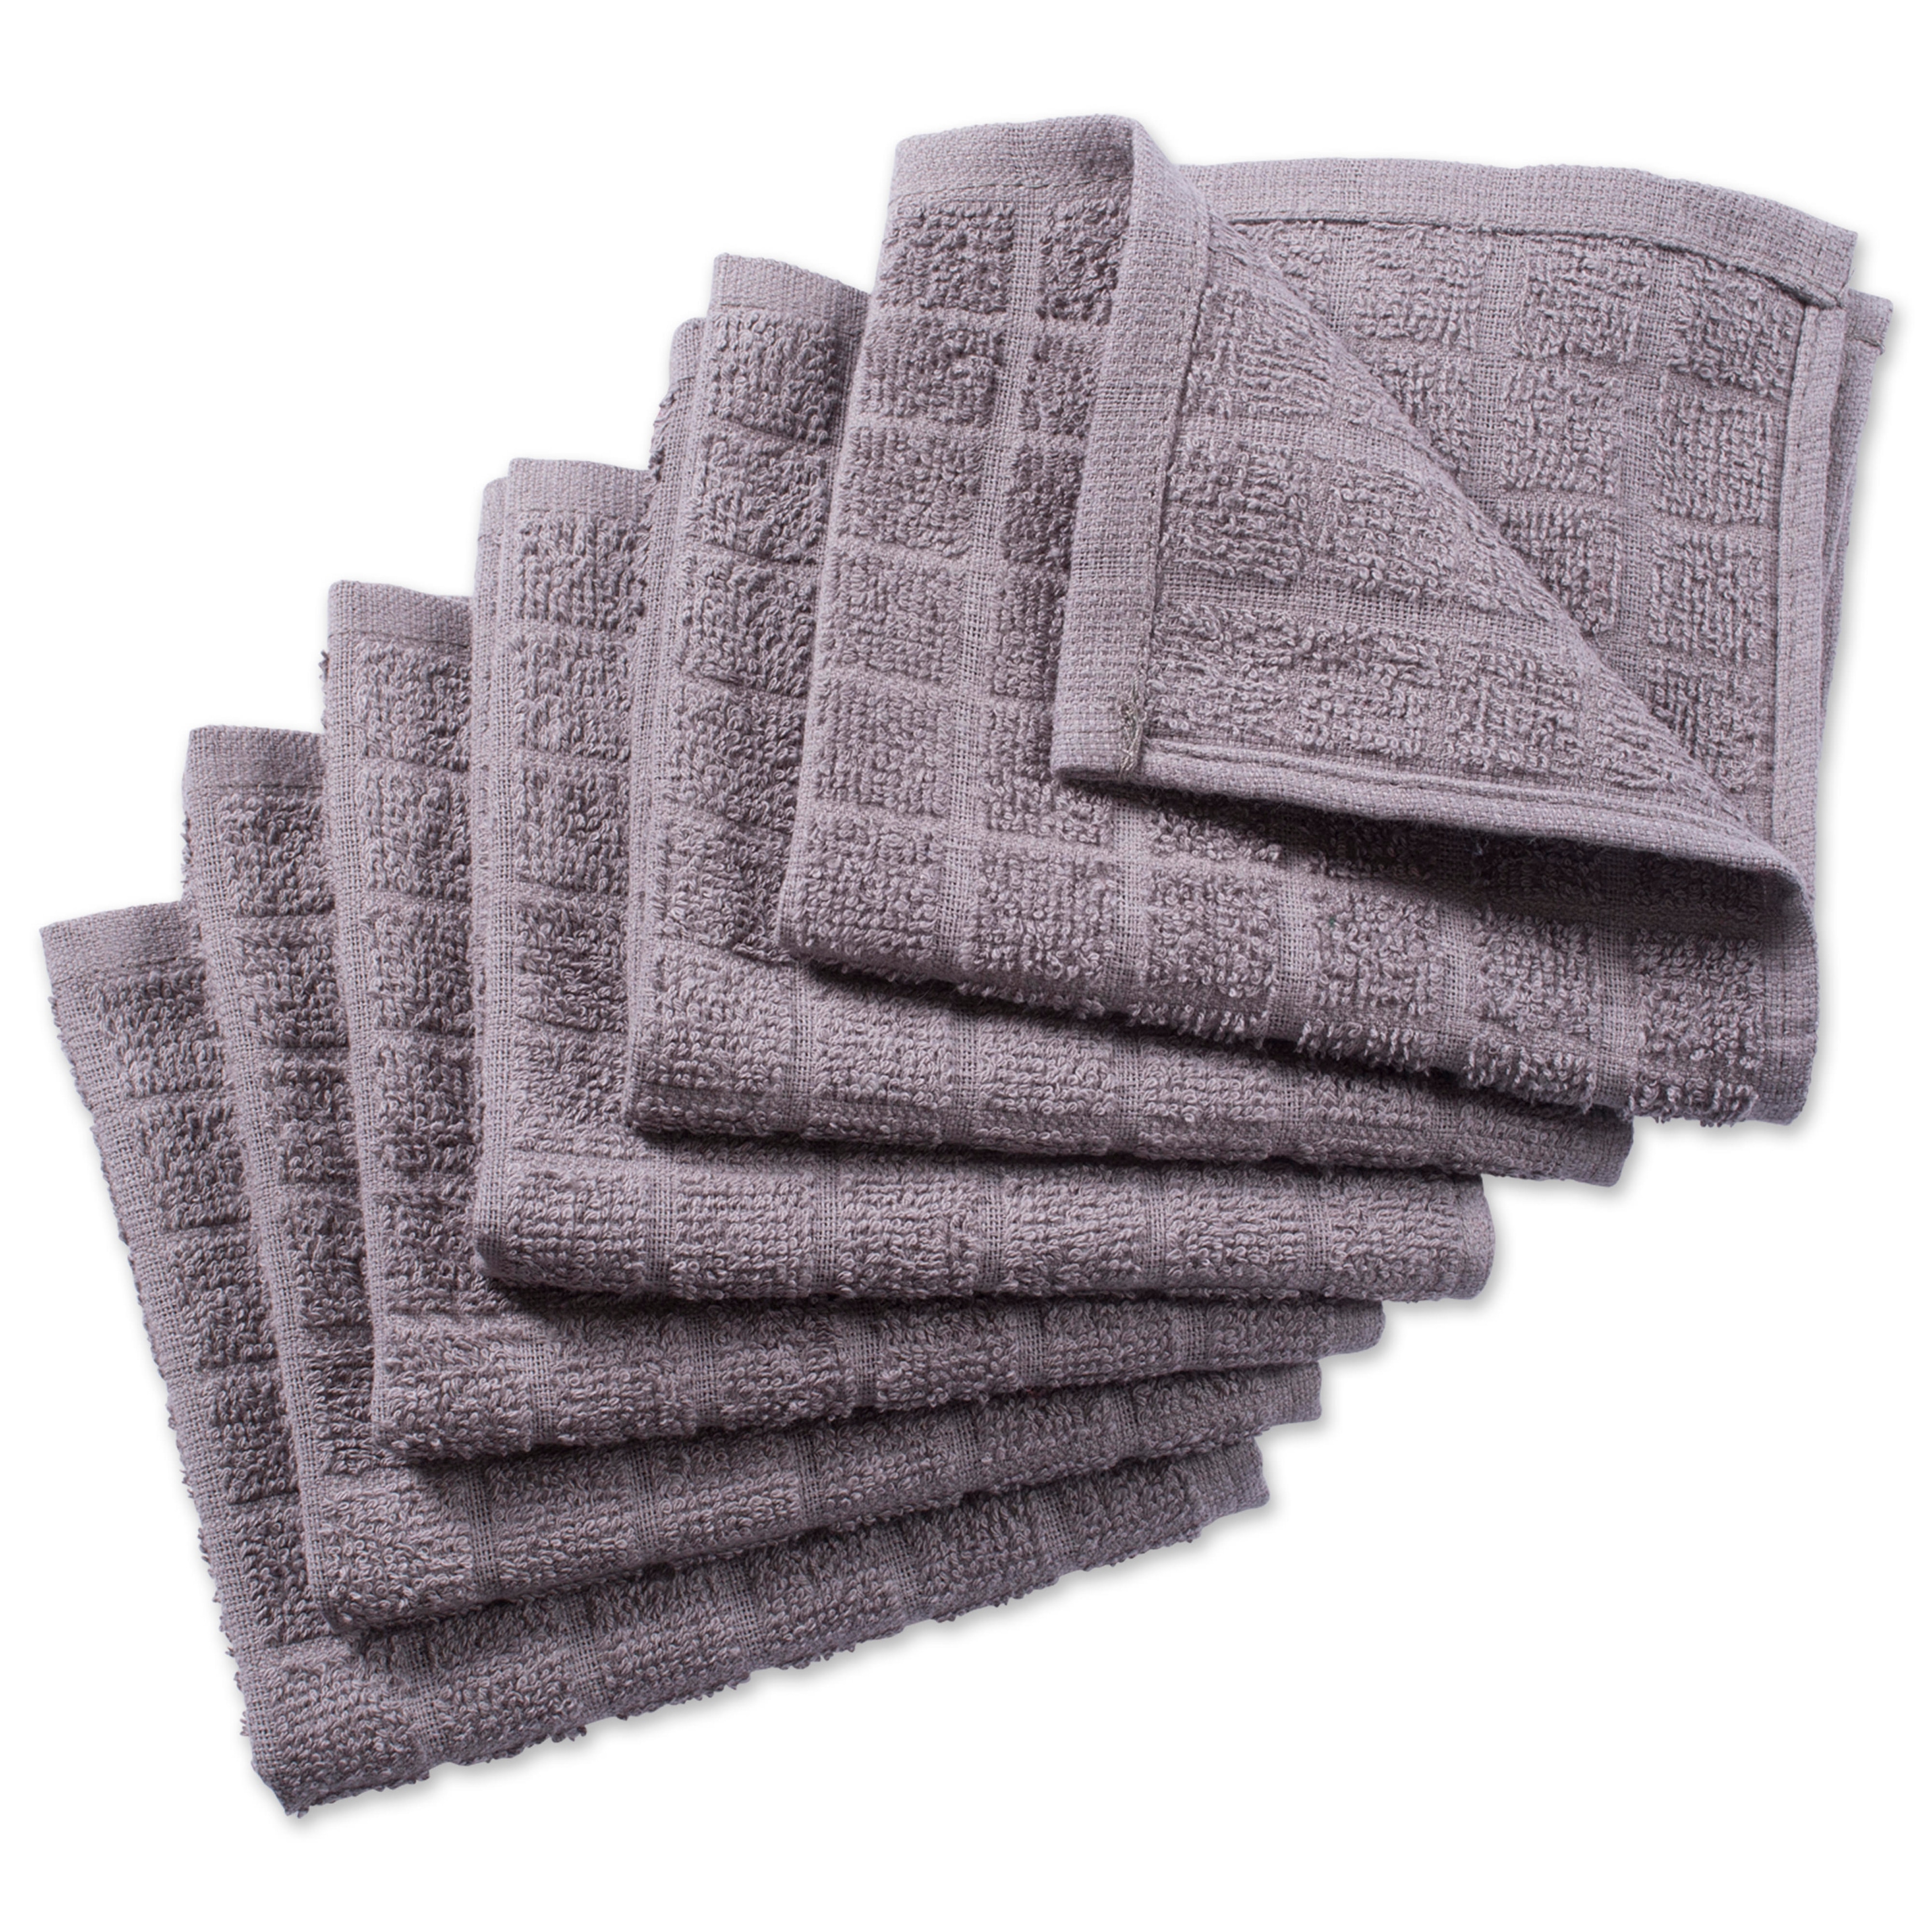 https://ak1.ostkcdn.com/images/products/is/images/direct/9bd5e69ba3ffda5f45ce3192a59d76720f4da409/Design-Imports-Solid-Windowpane-Terry-Dishcloth-Set-of-6-%2812-inches-long-x-12-inches-wide%29.jpg